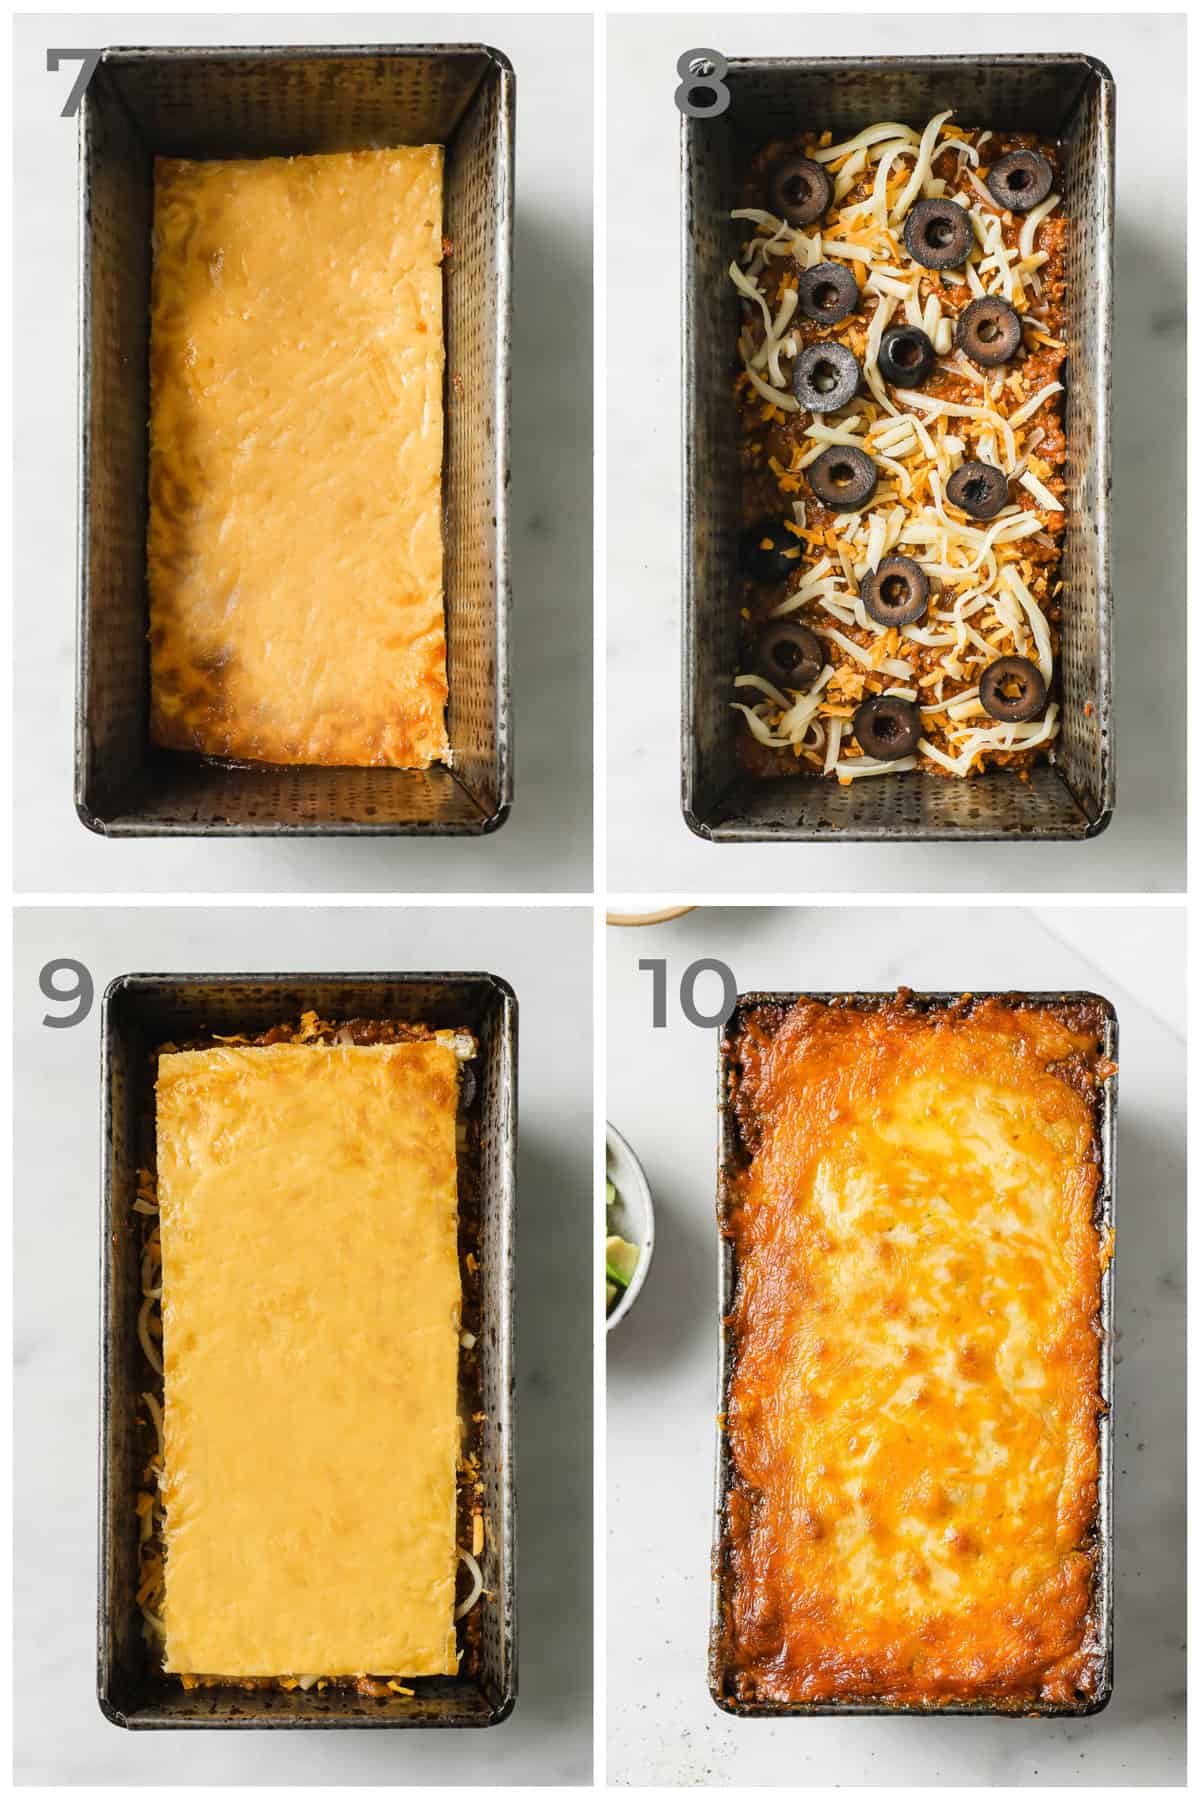 Step by step photo instructions for how to make a low carb and gluten free taco lasagna recipe.